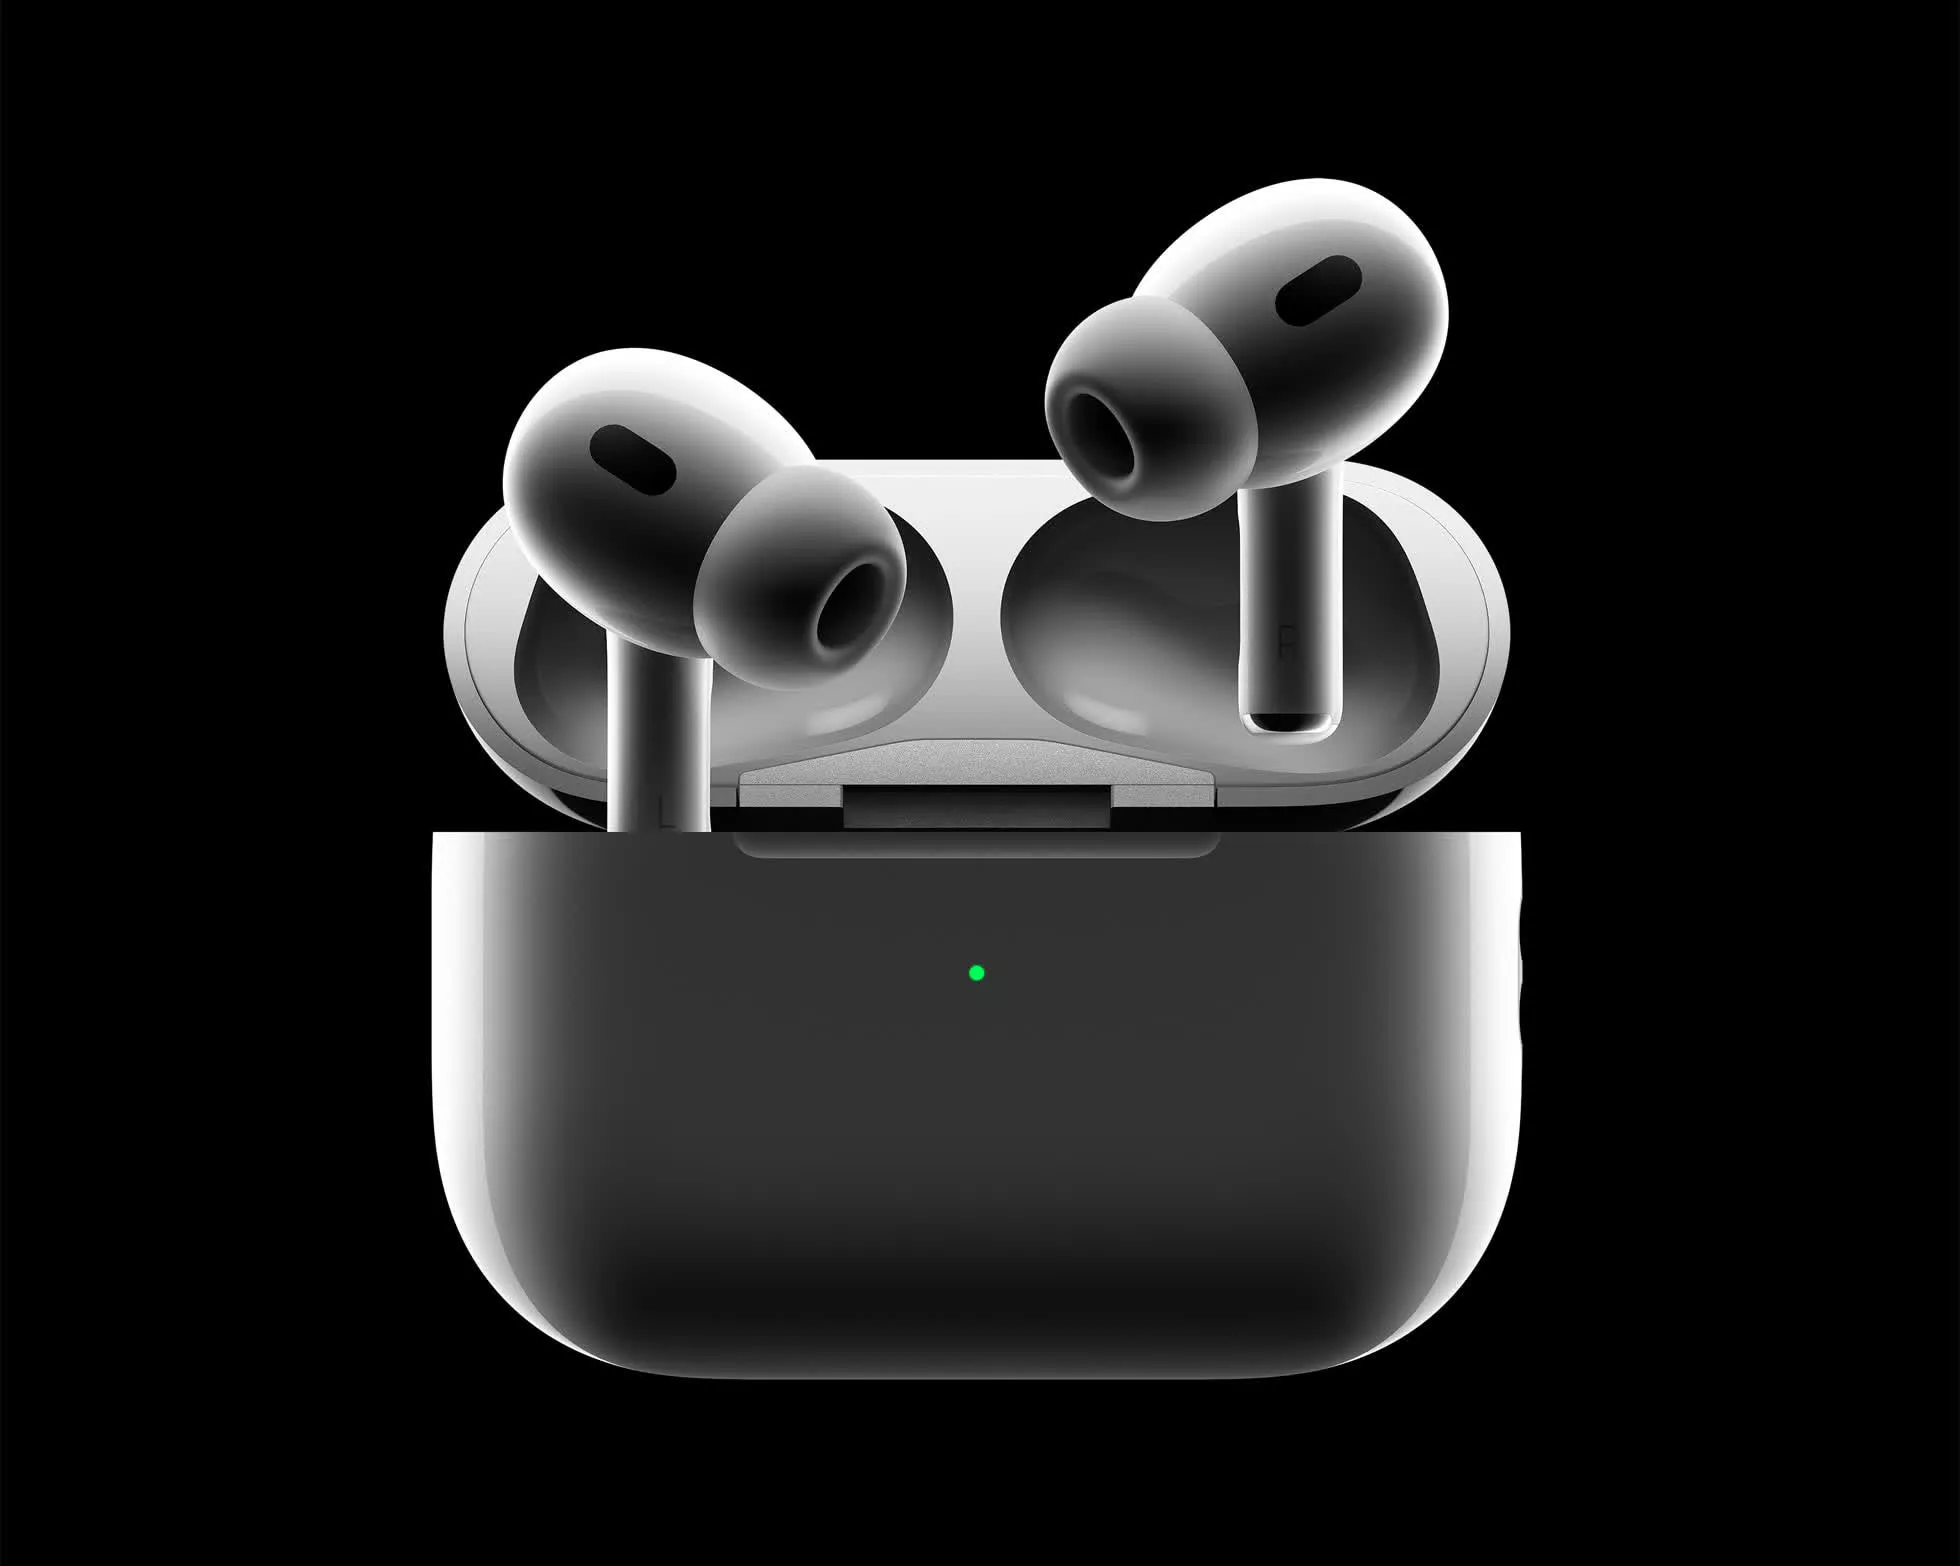 Apple AirPods Pro 2 launch with improved ANC, new H2 chip, improved battery life